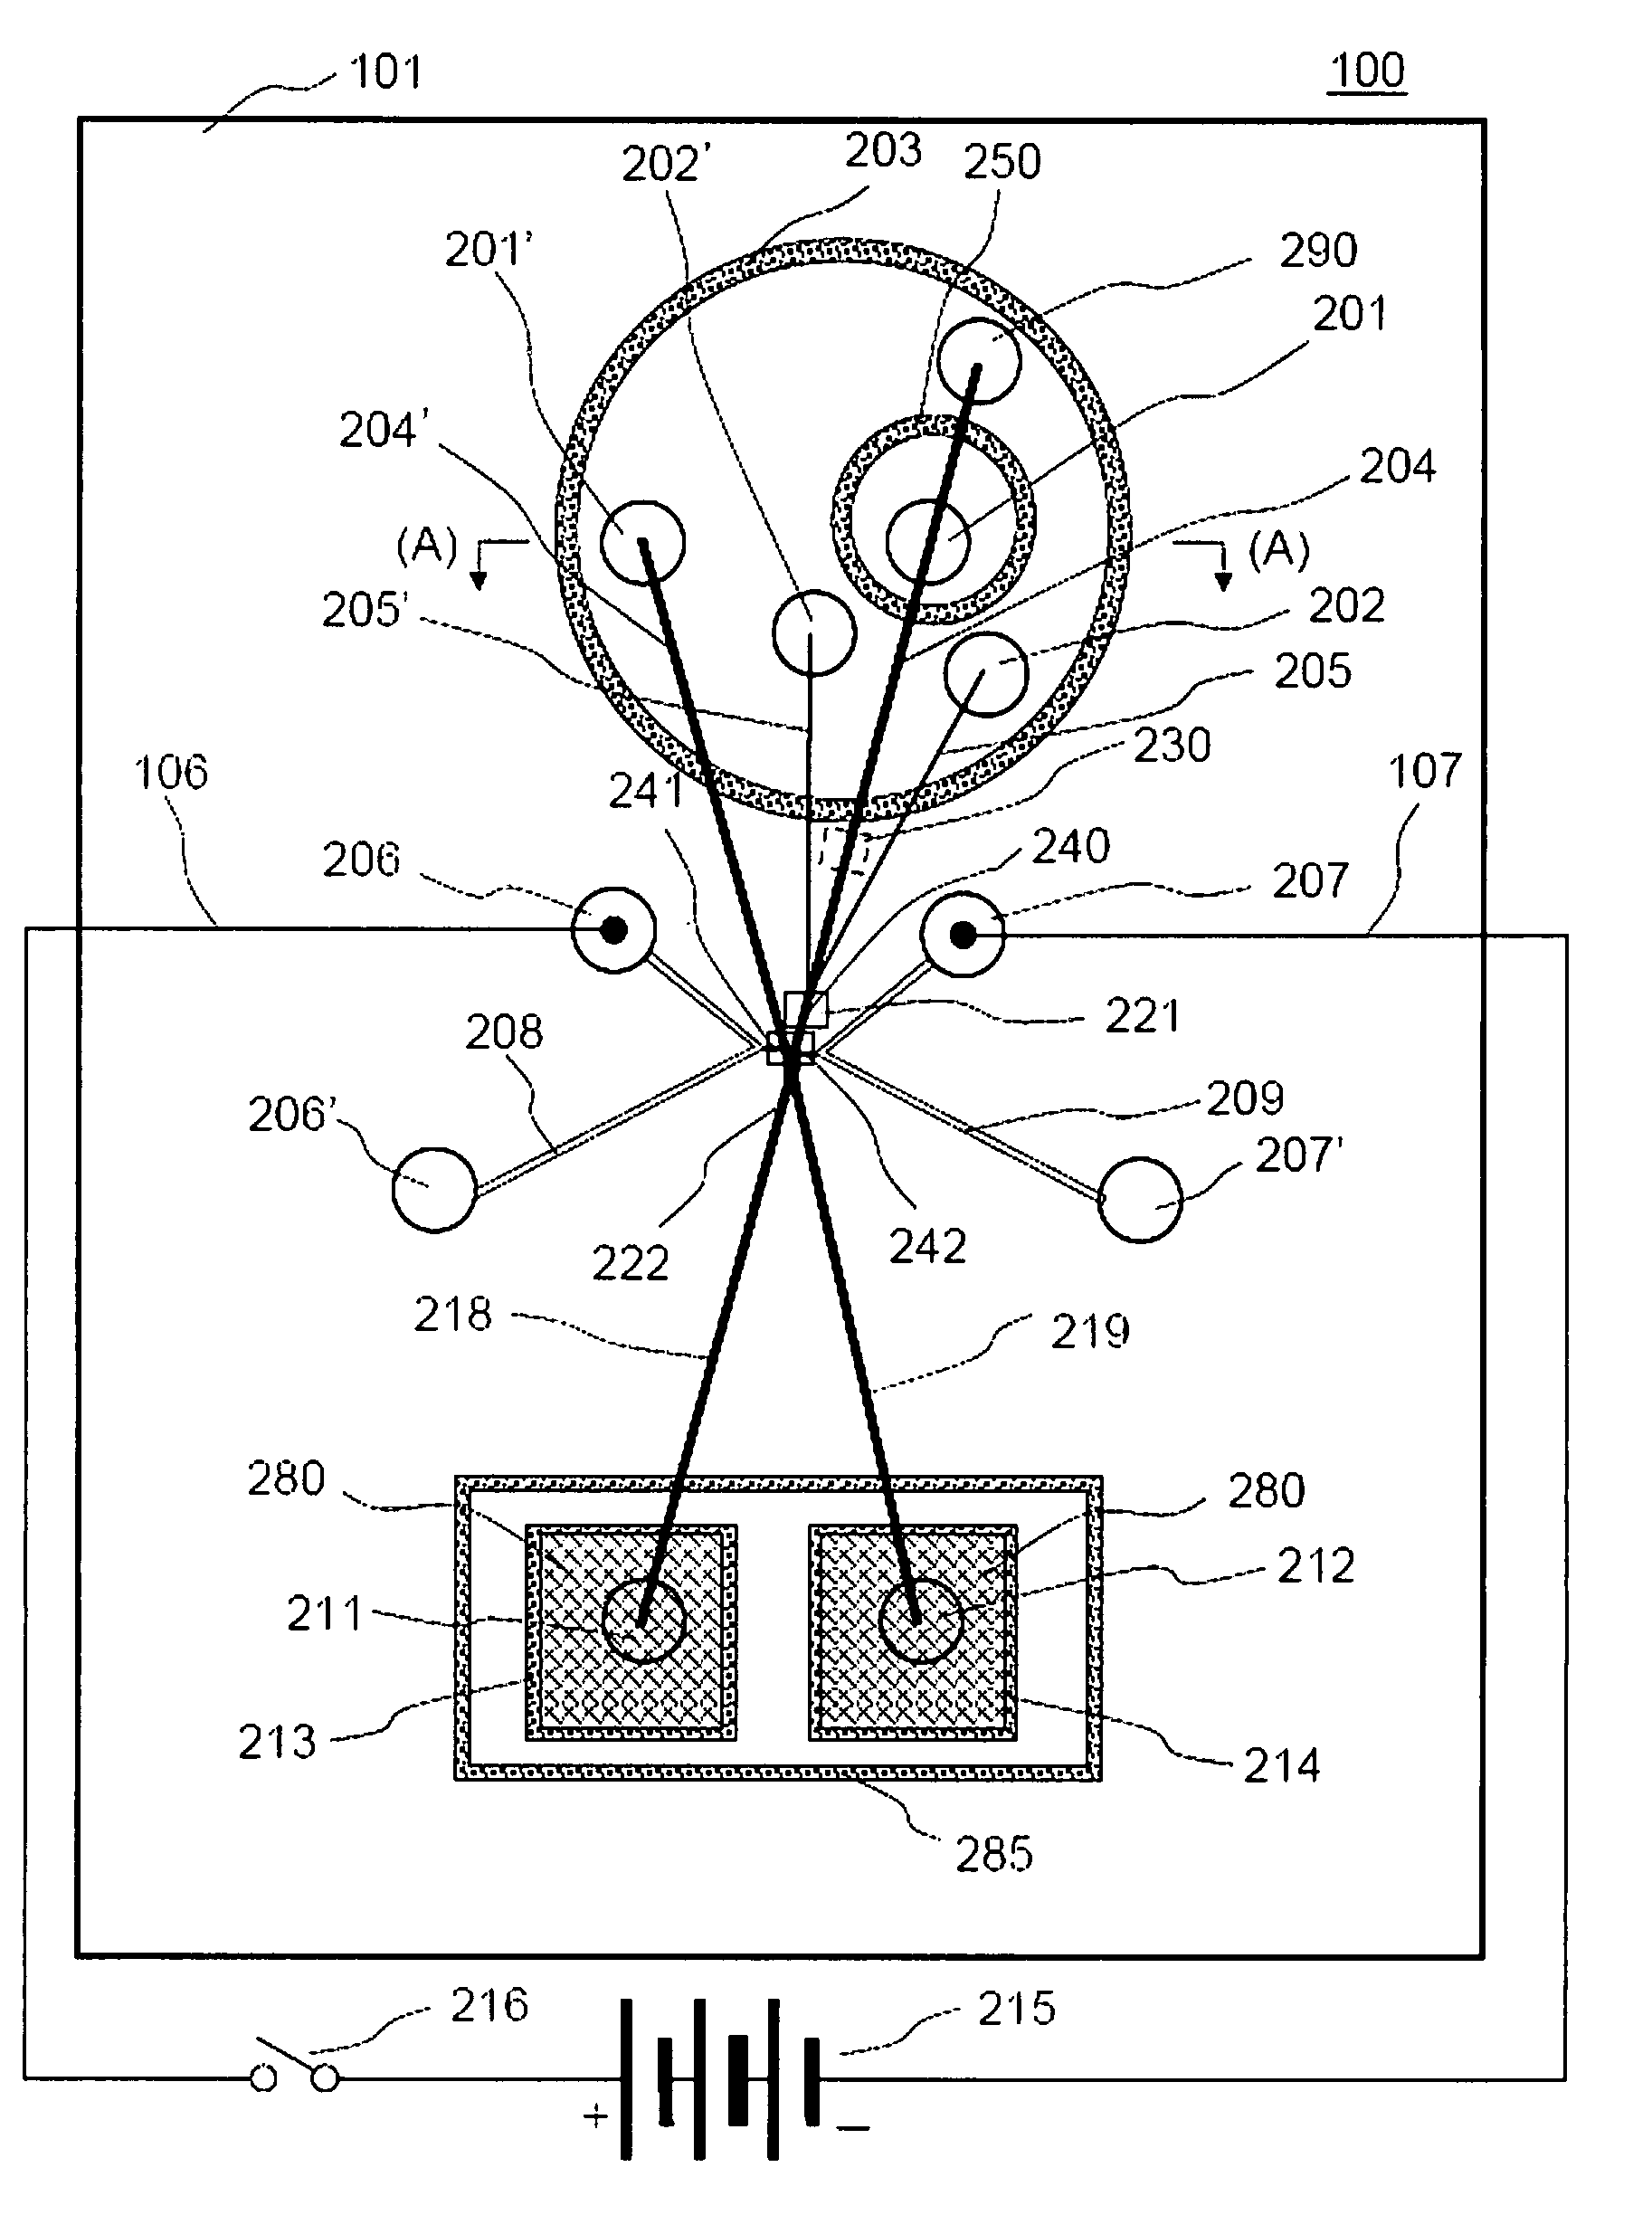 Cell separation chip and cell culturing method using the same